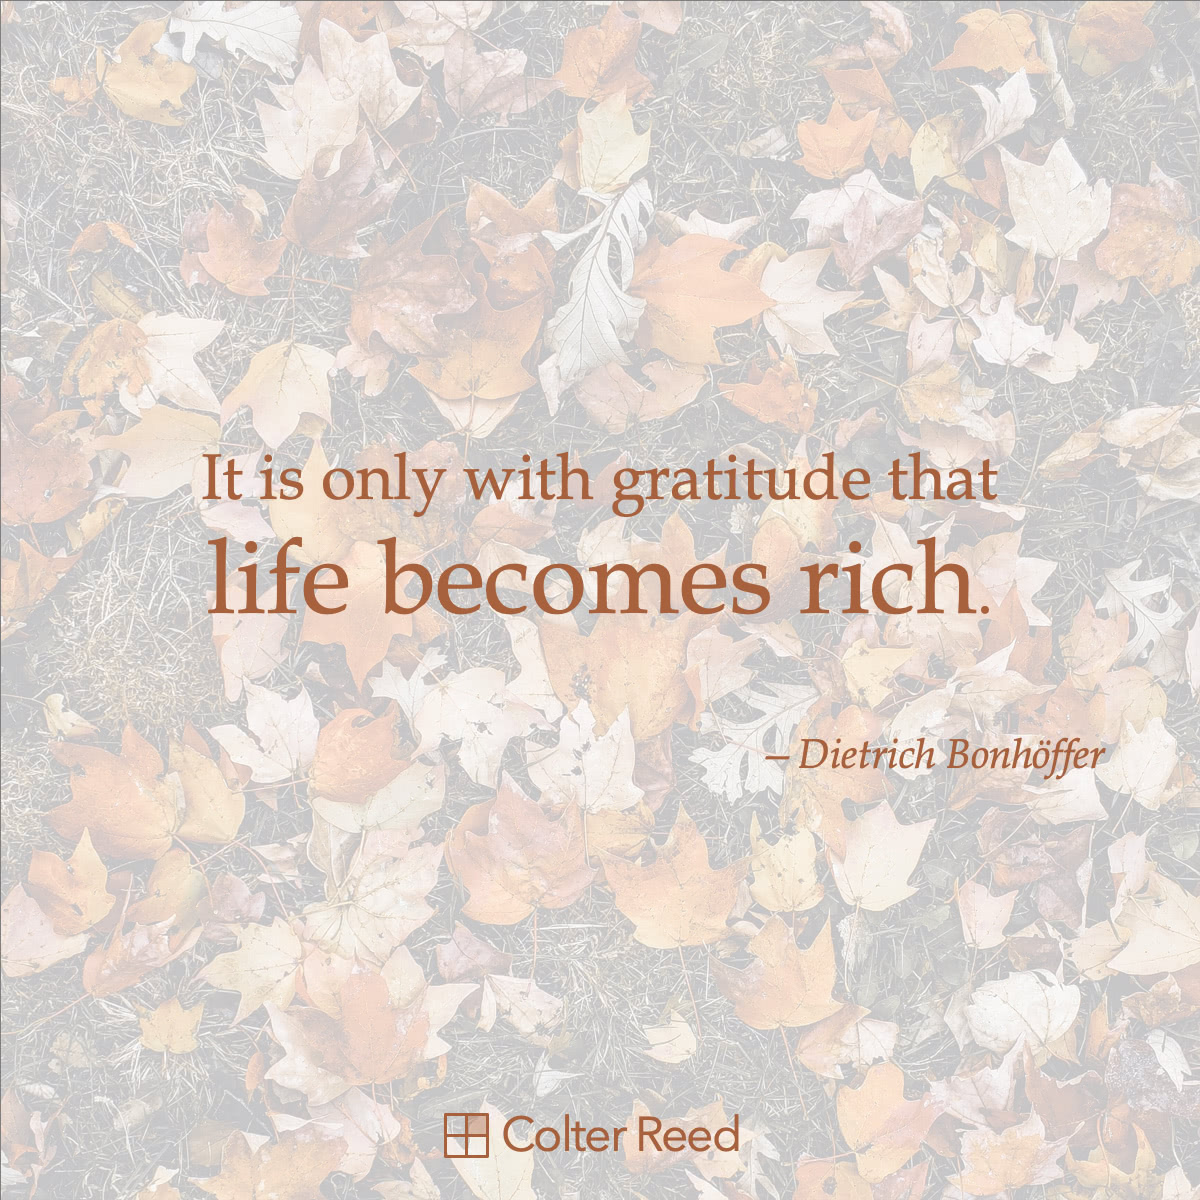 It is only with gratitude that life becomes rich. —Dietrich Bonhöffer